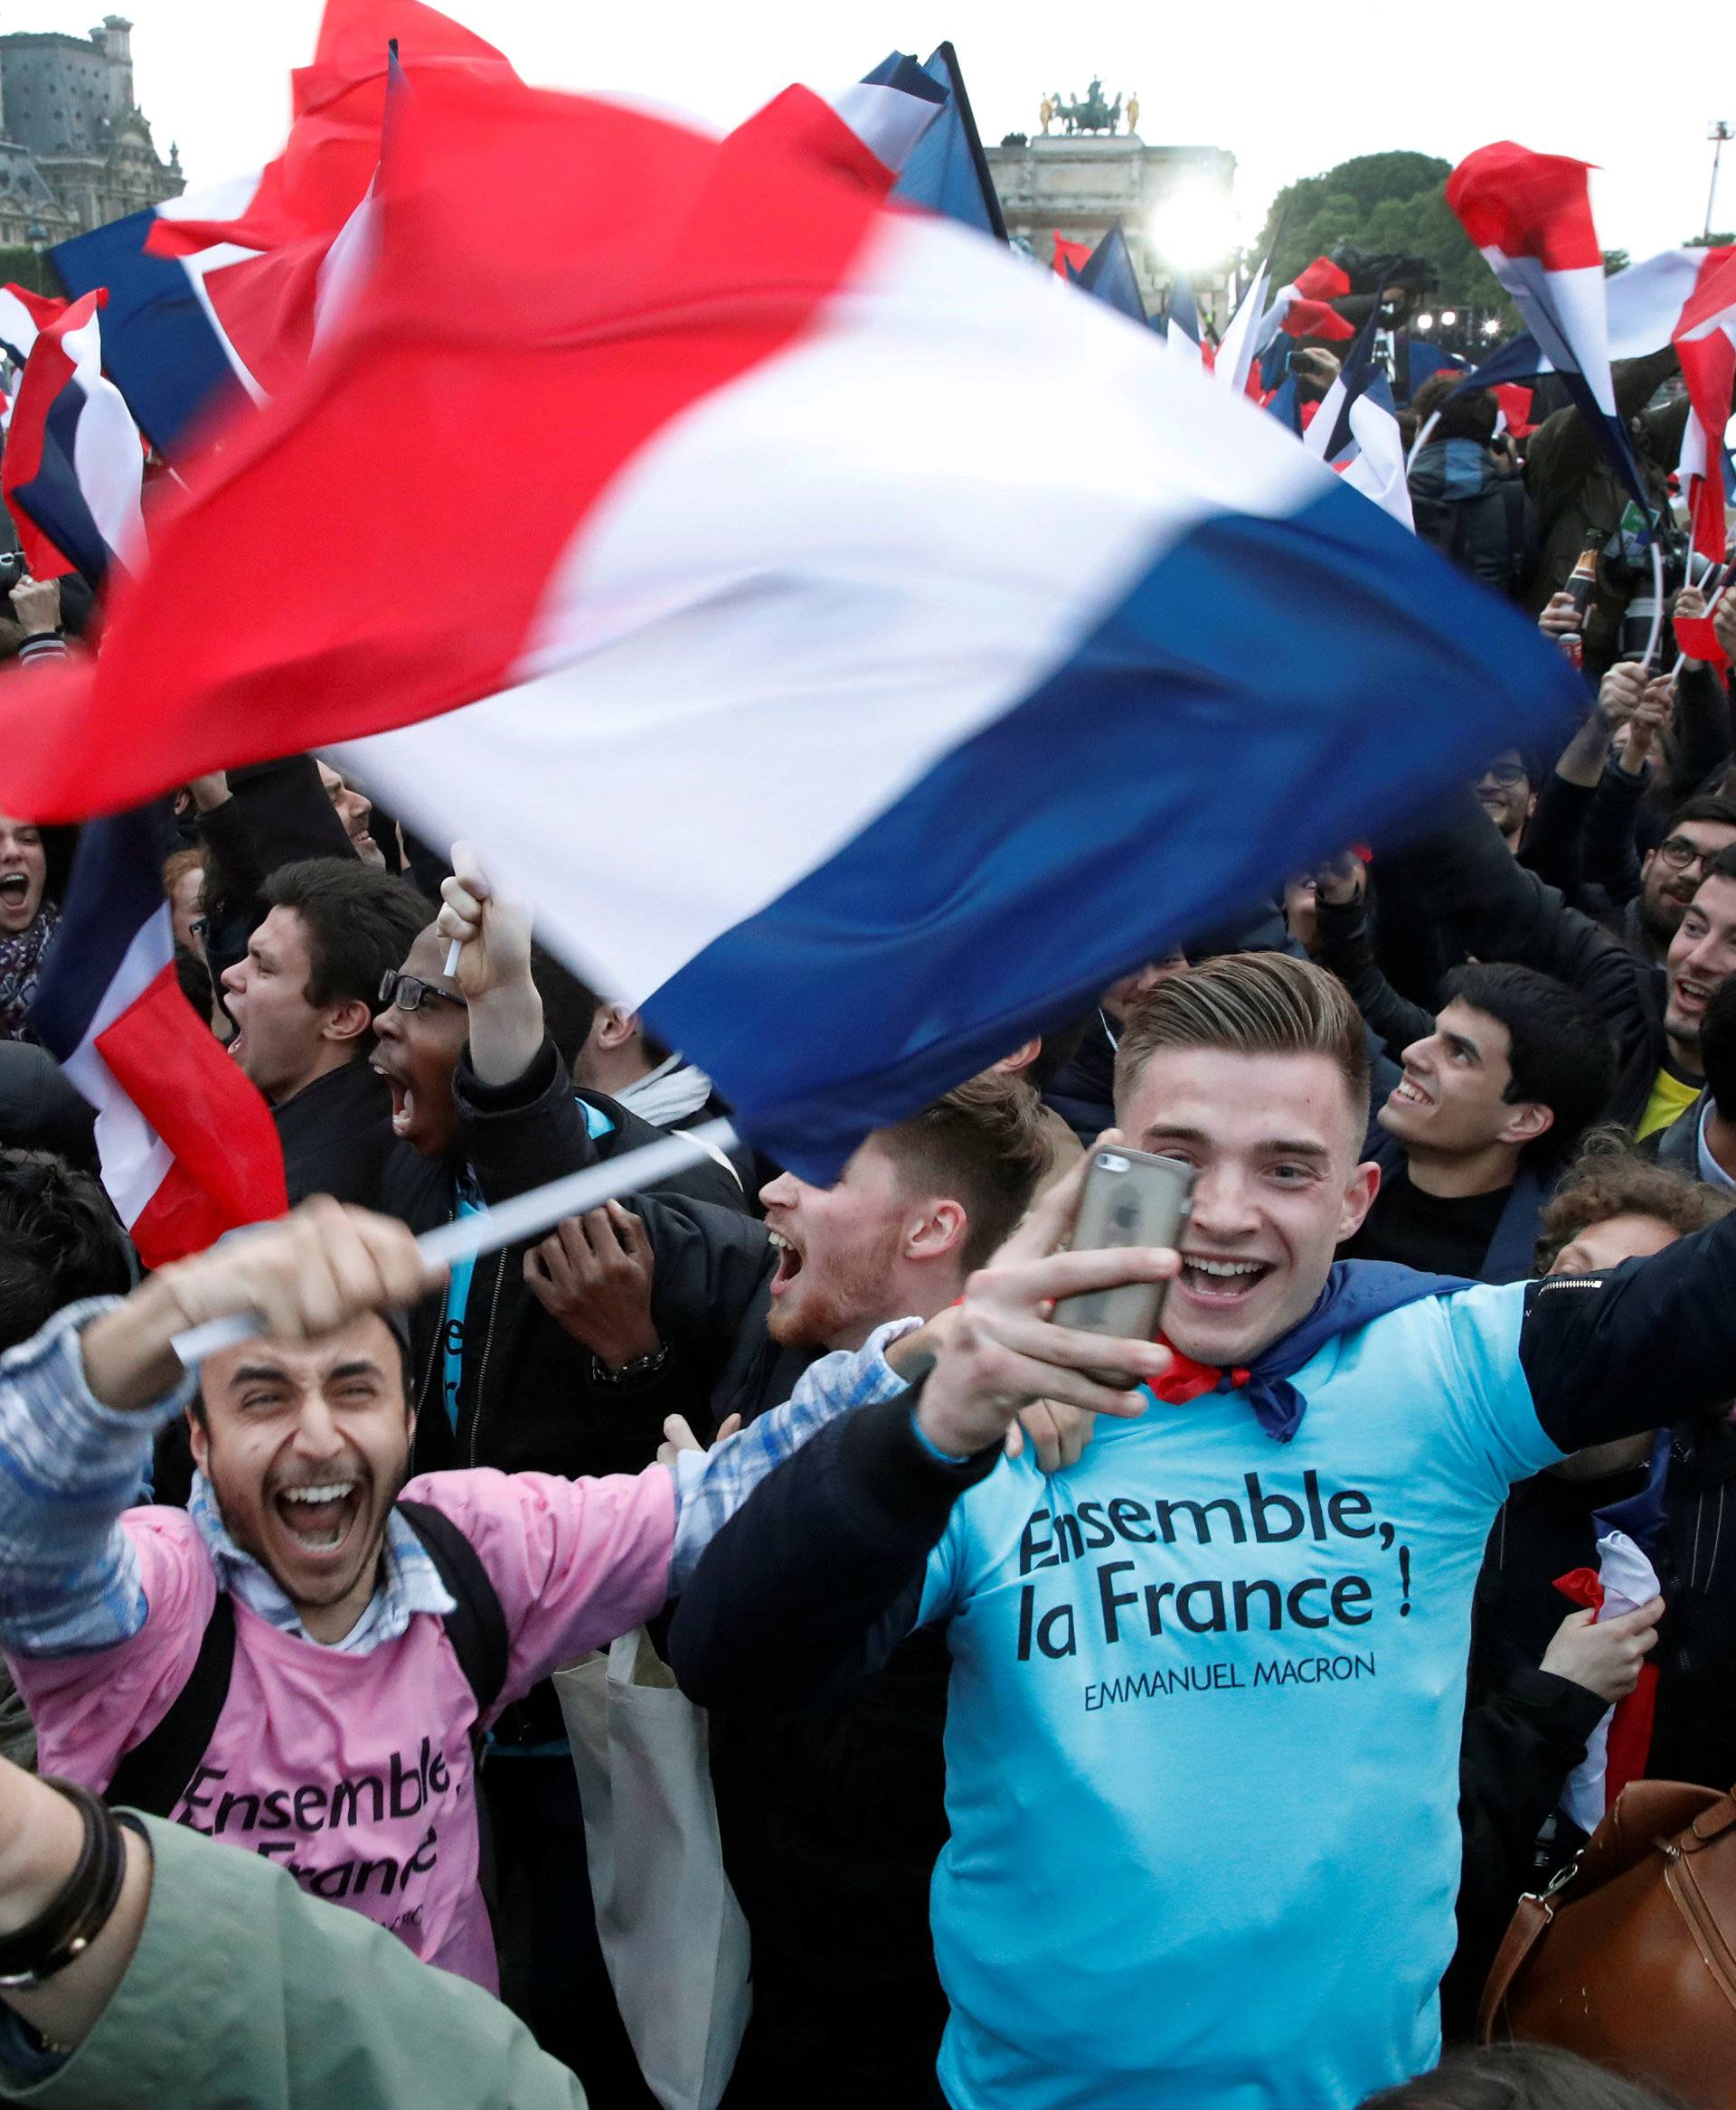 Supporters of President Elect Emmanuel Macron celebrate near the Louvre museum after results were announced in the second round vote of the 2017 French presidential elections, in Paris